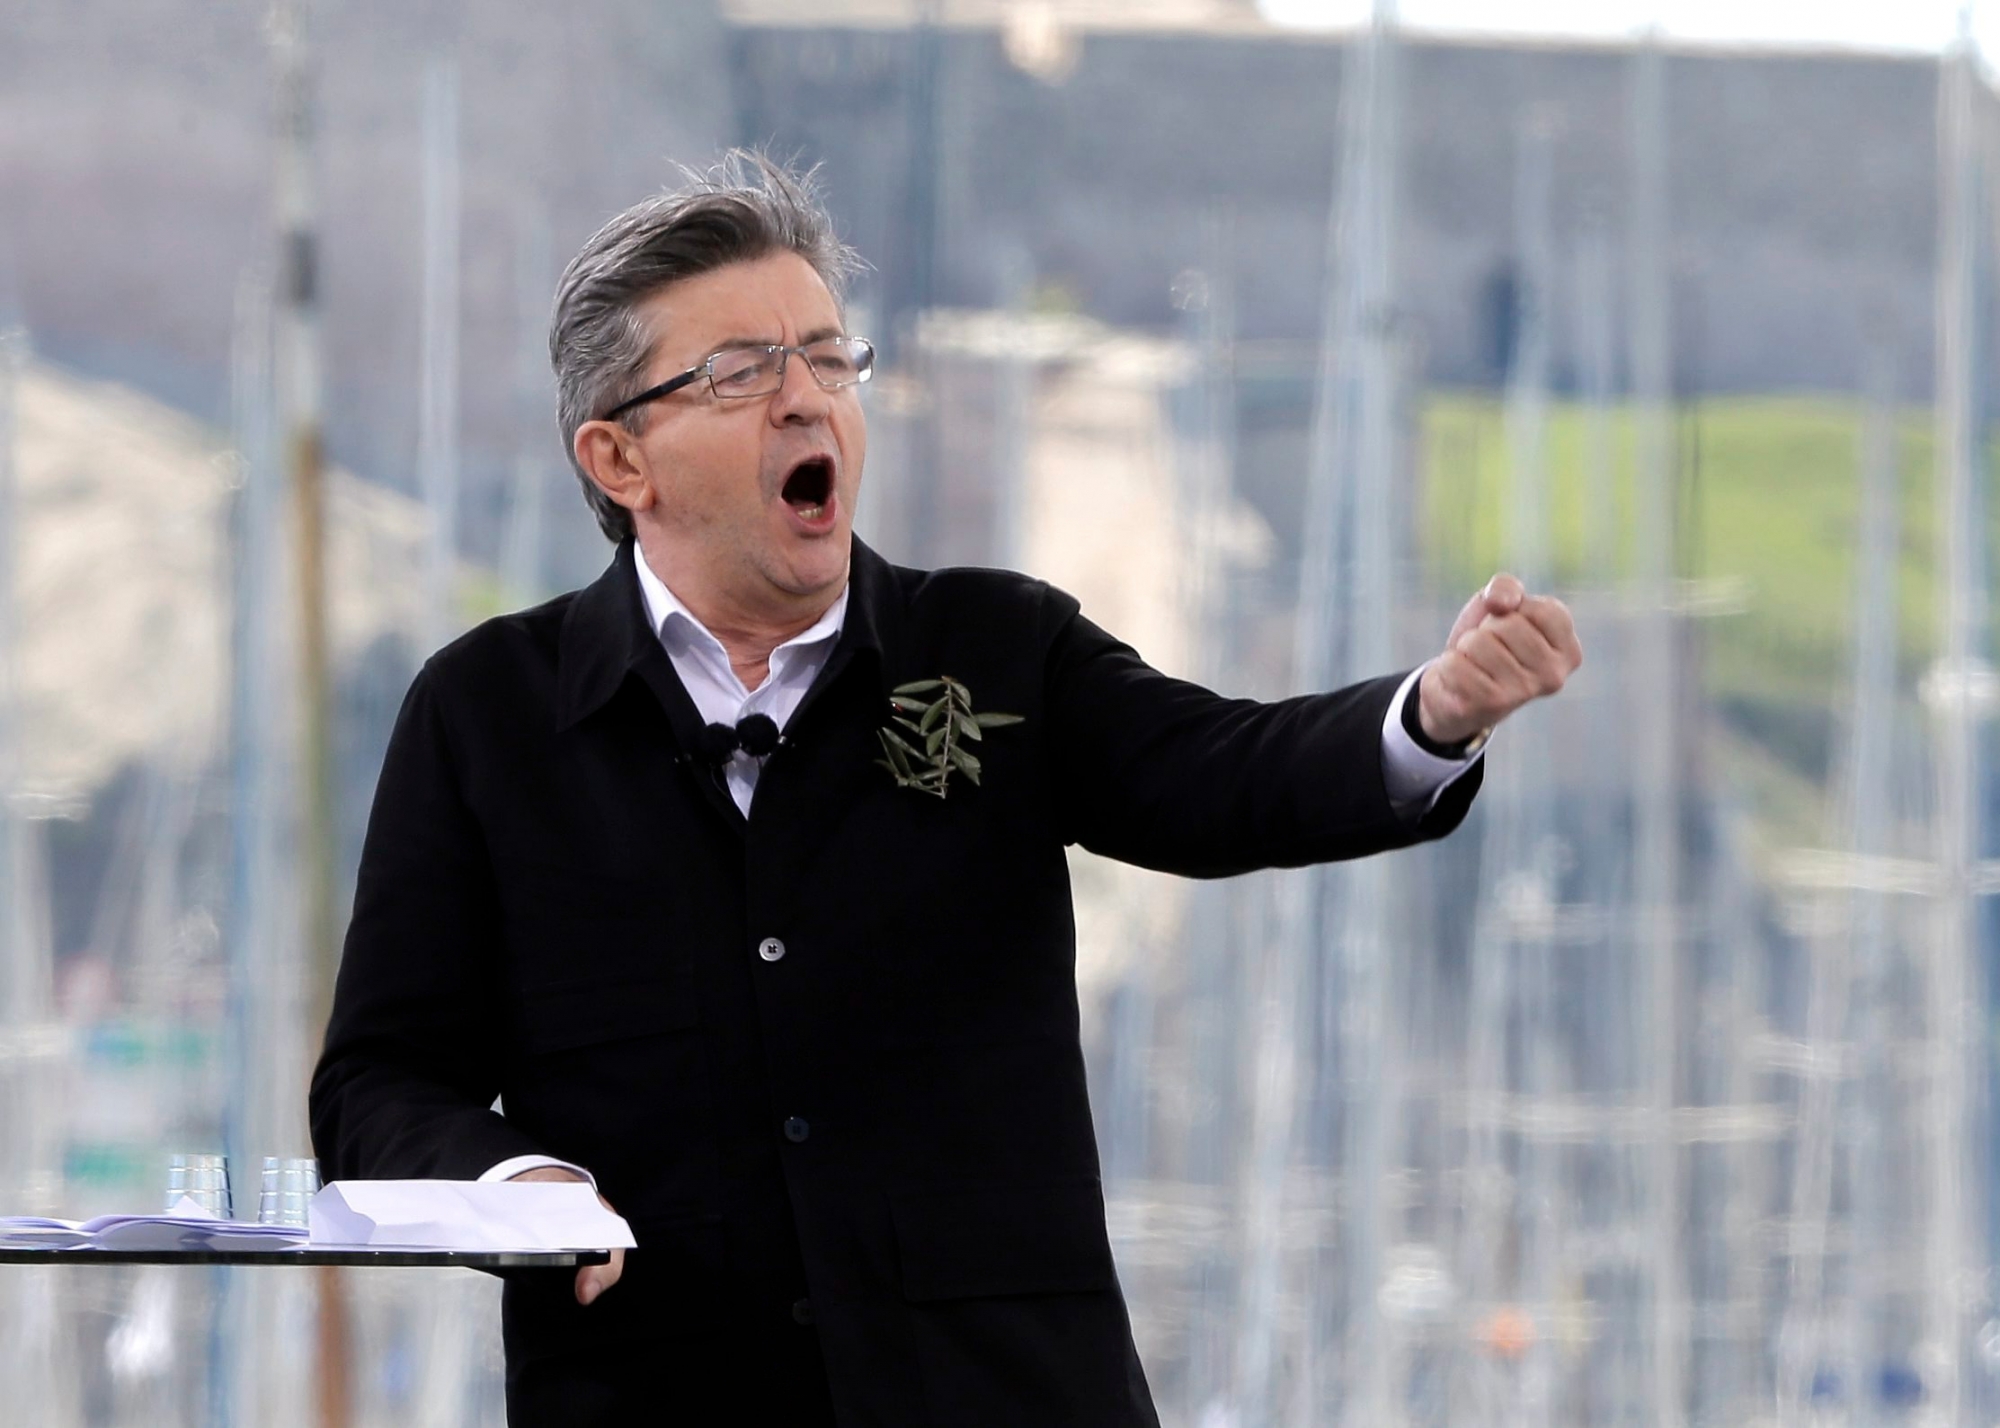 French hard-left presidential candidate, Jean-Luc Melenchon, speaks during a campaign rally in Marseille's Old Port, southern France, Sunday, April 9, 2017. The two-round presidential election is set for April 23 and May 7. (AP Photo/Claude Paris) FRANKREICH WAHLEN PRAESIDENT MELENCHON